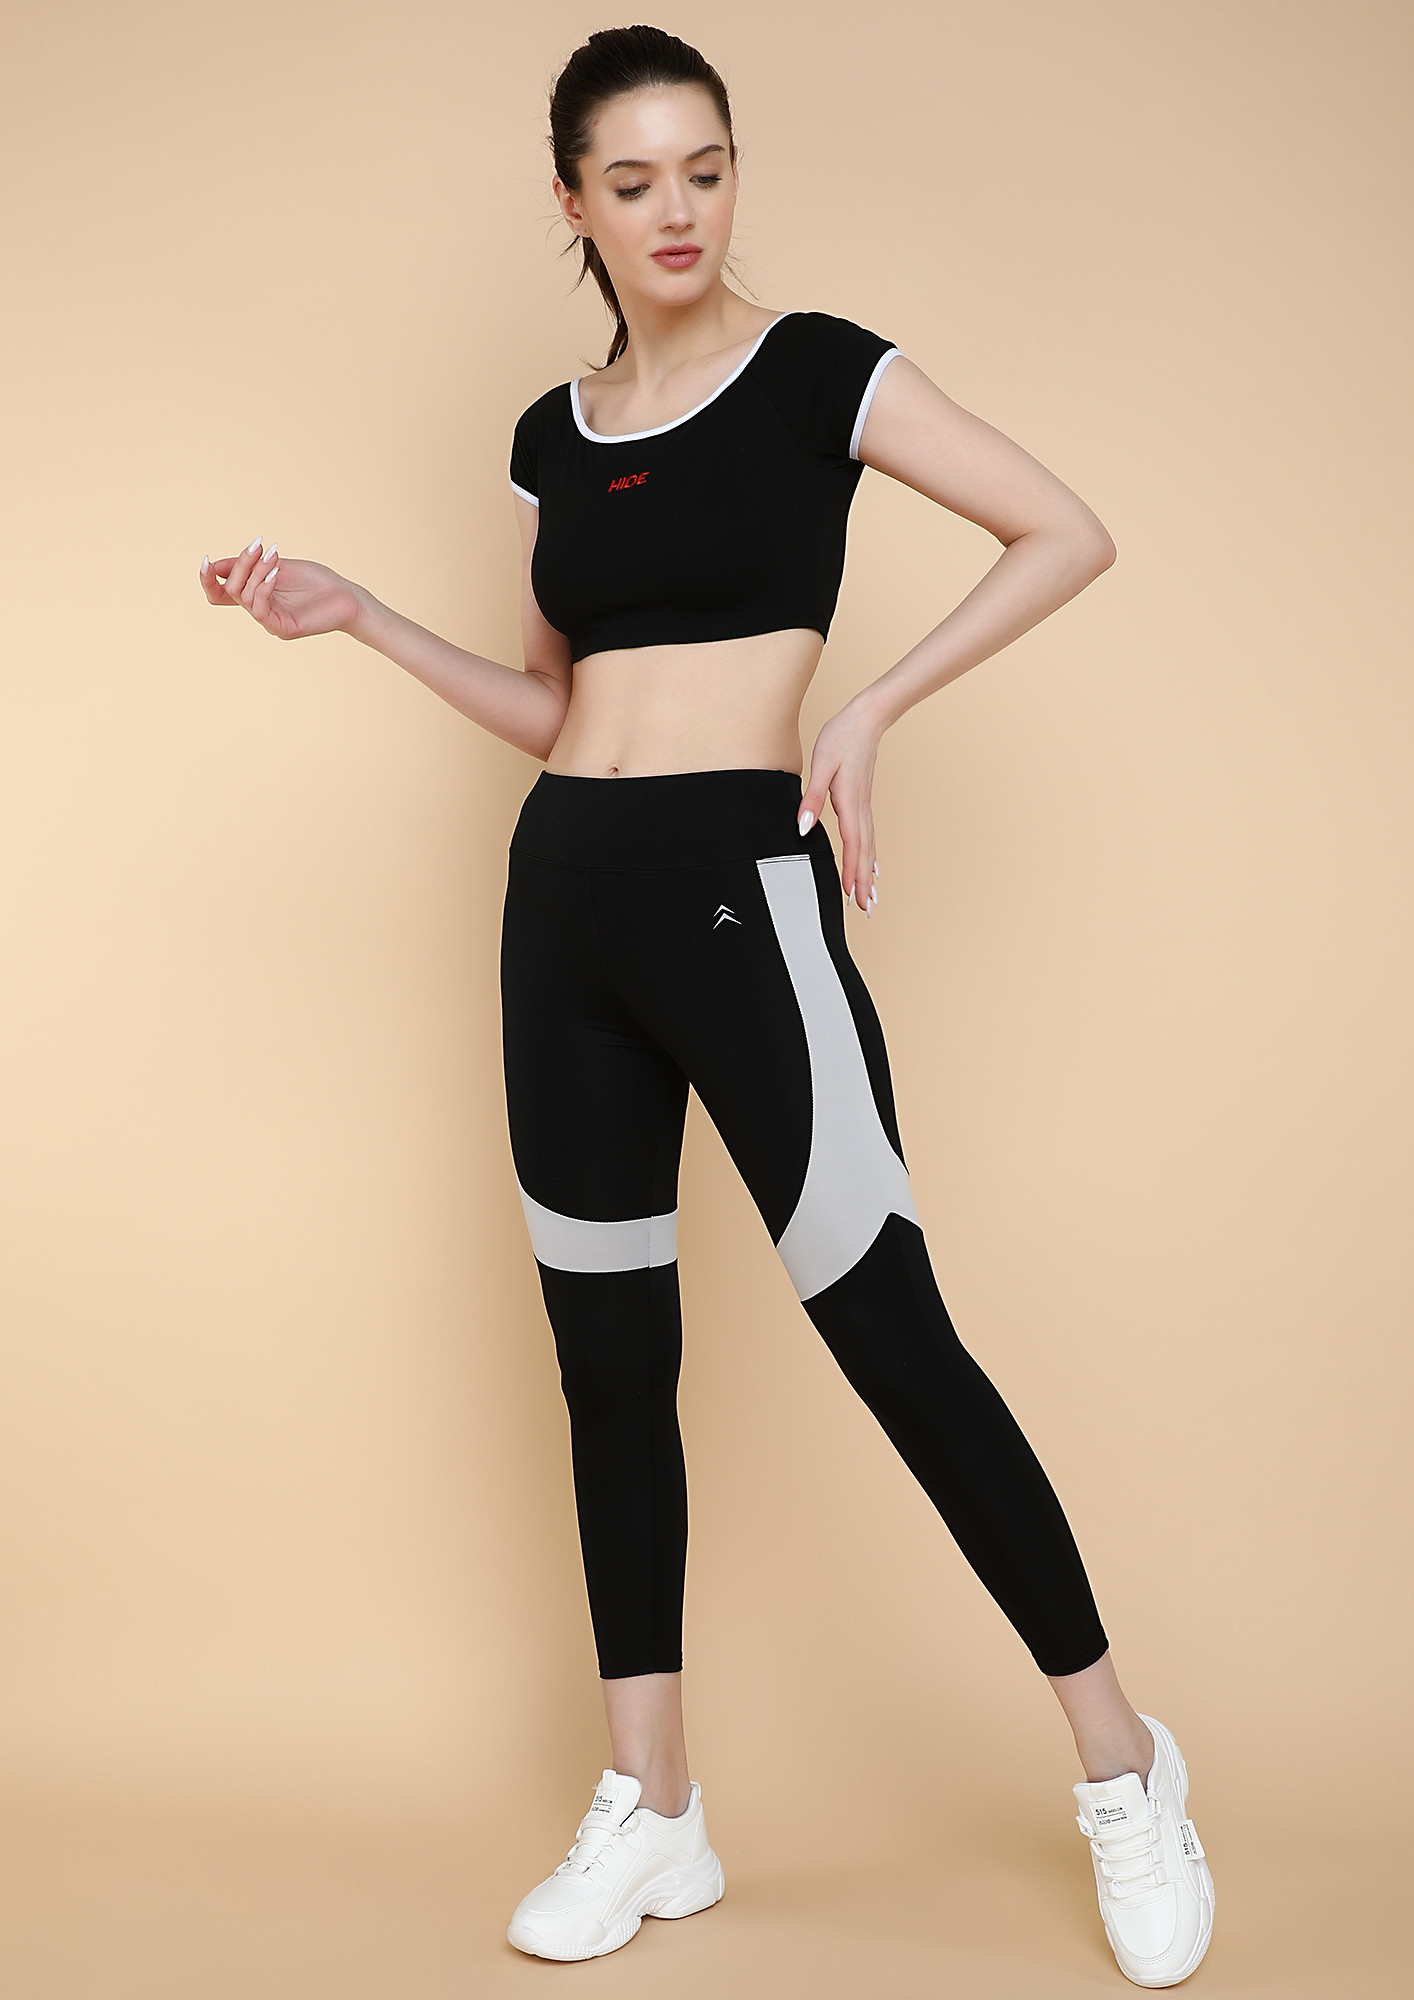 Women's Sports Trousers: Buy Women's Sports Trousers Online at Low Prices  in India 